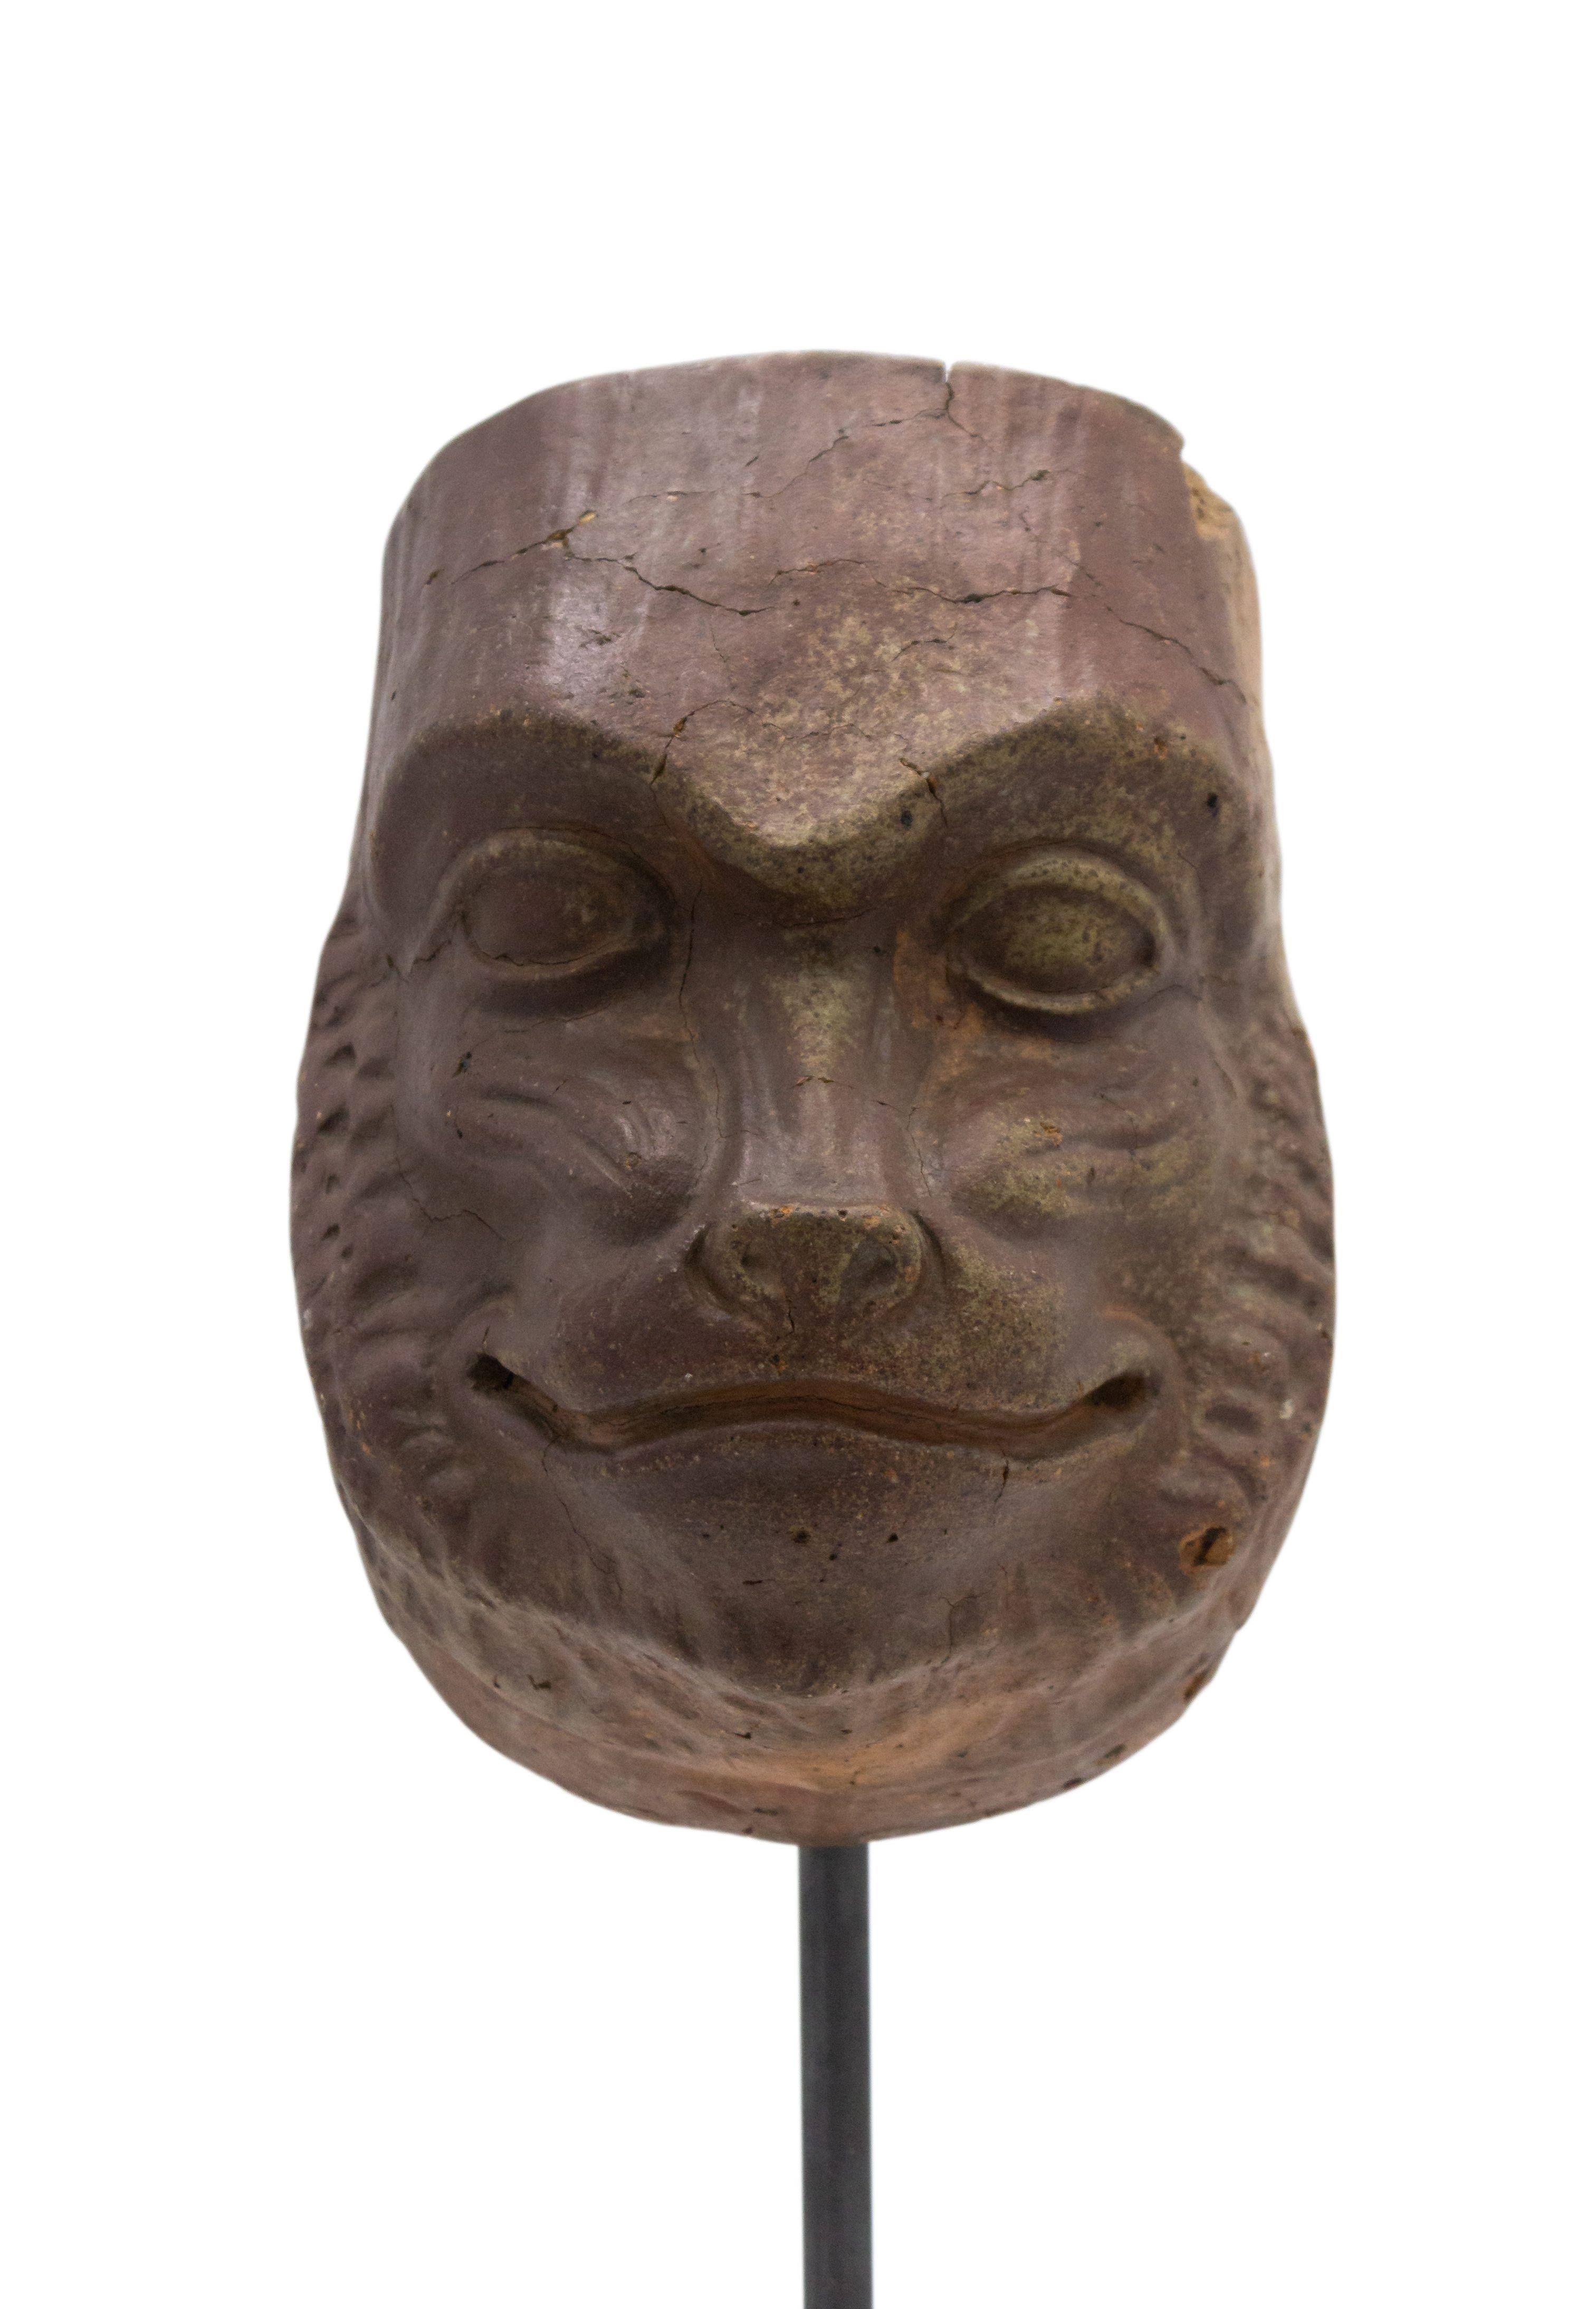 Continental German (late 19th Cent) sculpted terra-cotta master mask mold of a smiling baboon face displayed on a square black marble base stand (part of a collection).
 